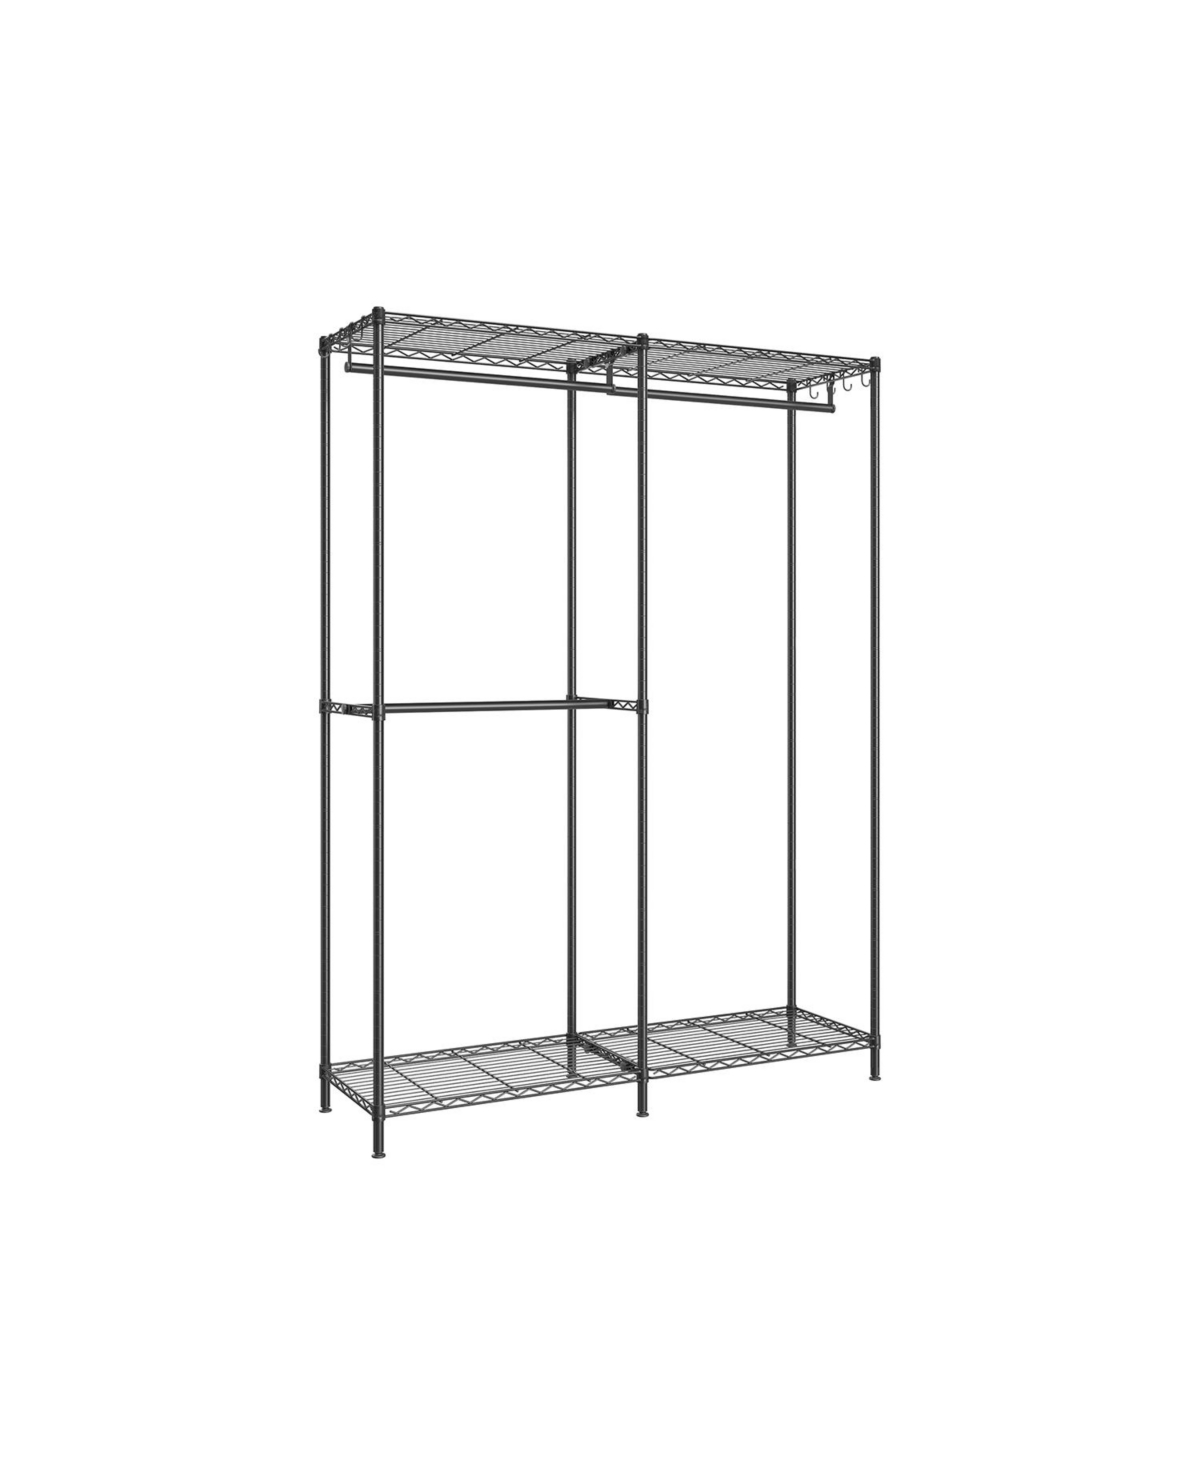 Metal Clothing Racks, Heavy-Duty Garment Rack with Adjustable Wire Shelves, Hanging Rods, Hooks - White